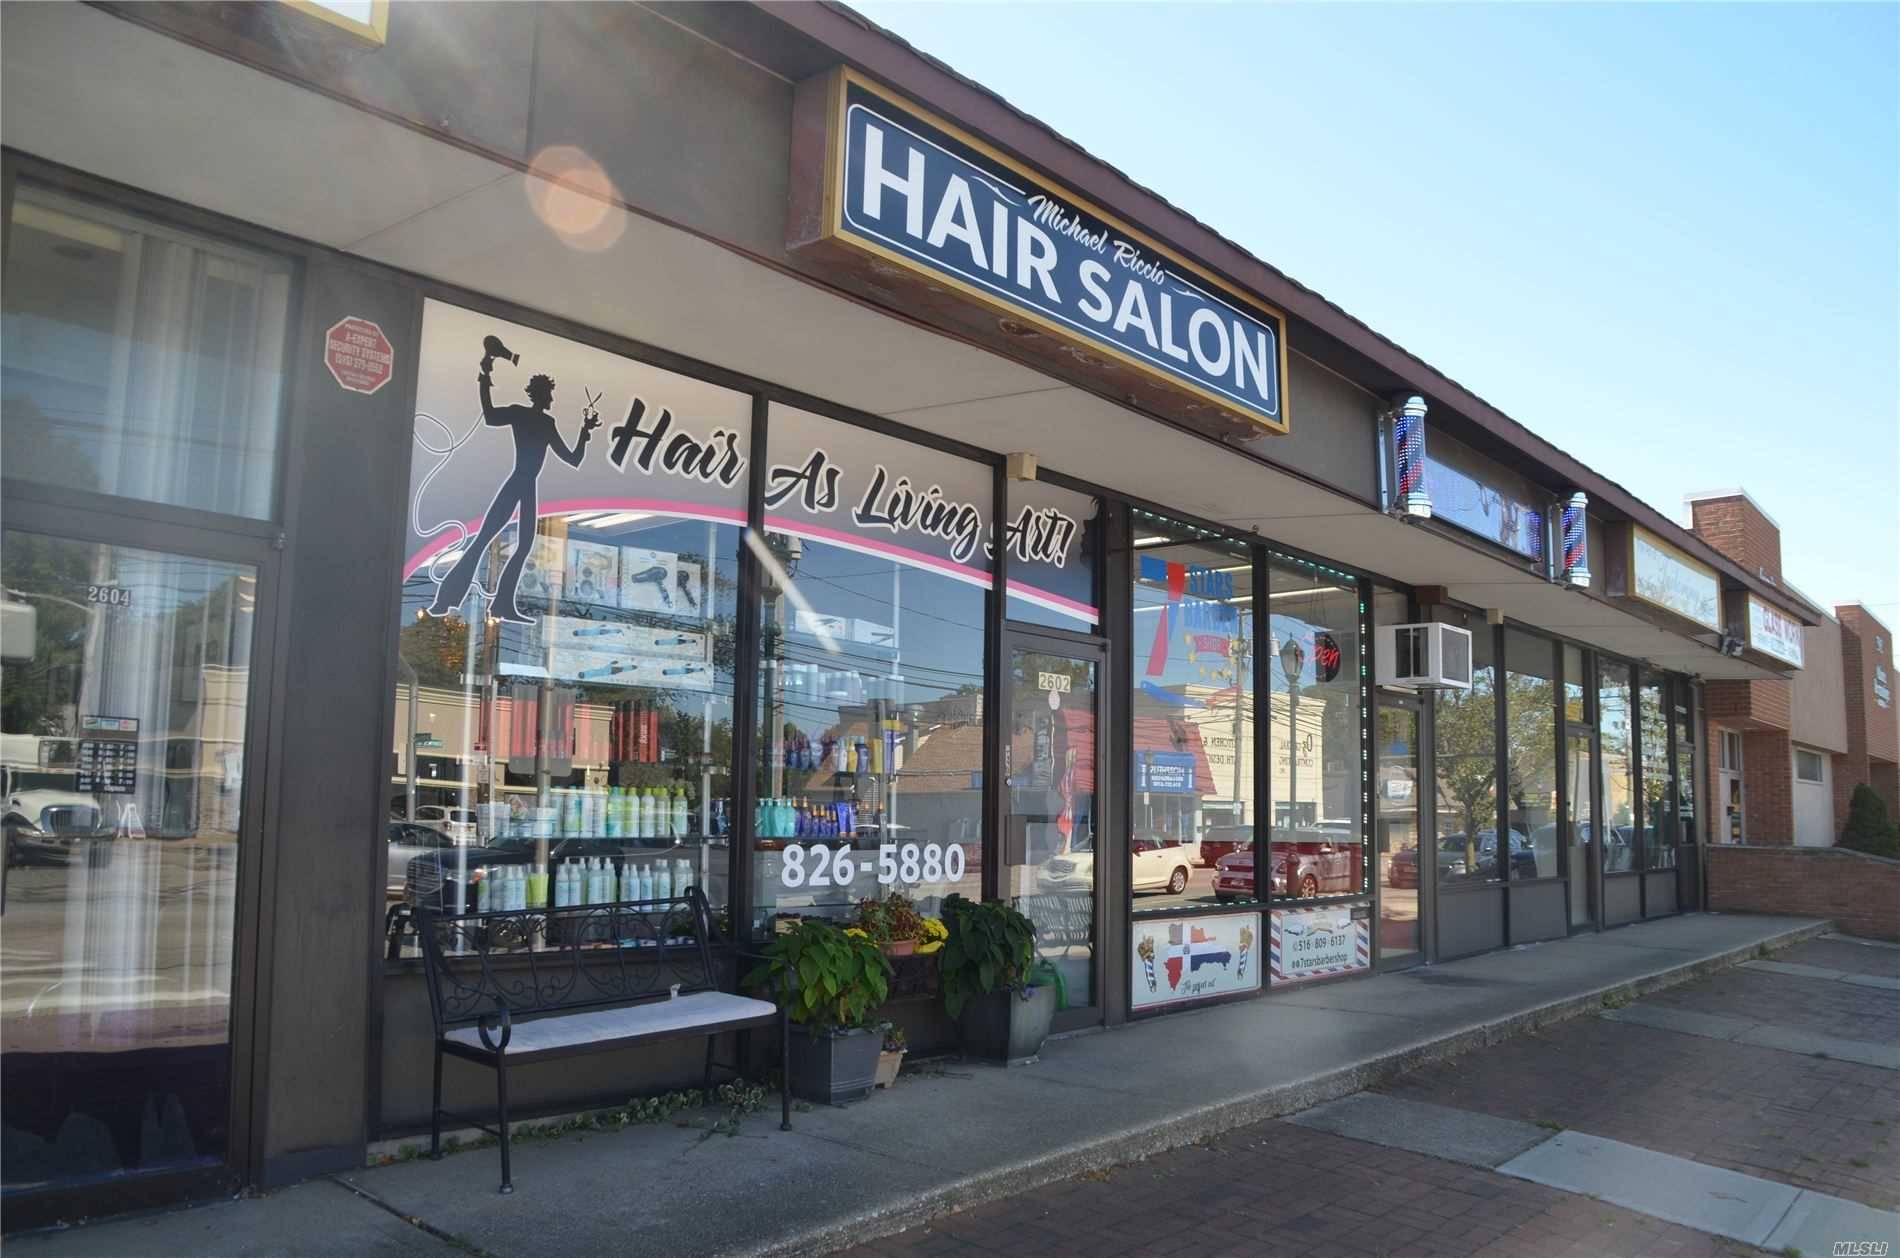 40 year establilshed business for sale on high traffic downtown Merrick Road location.